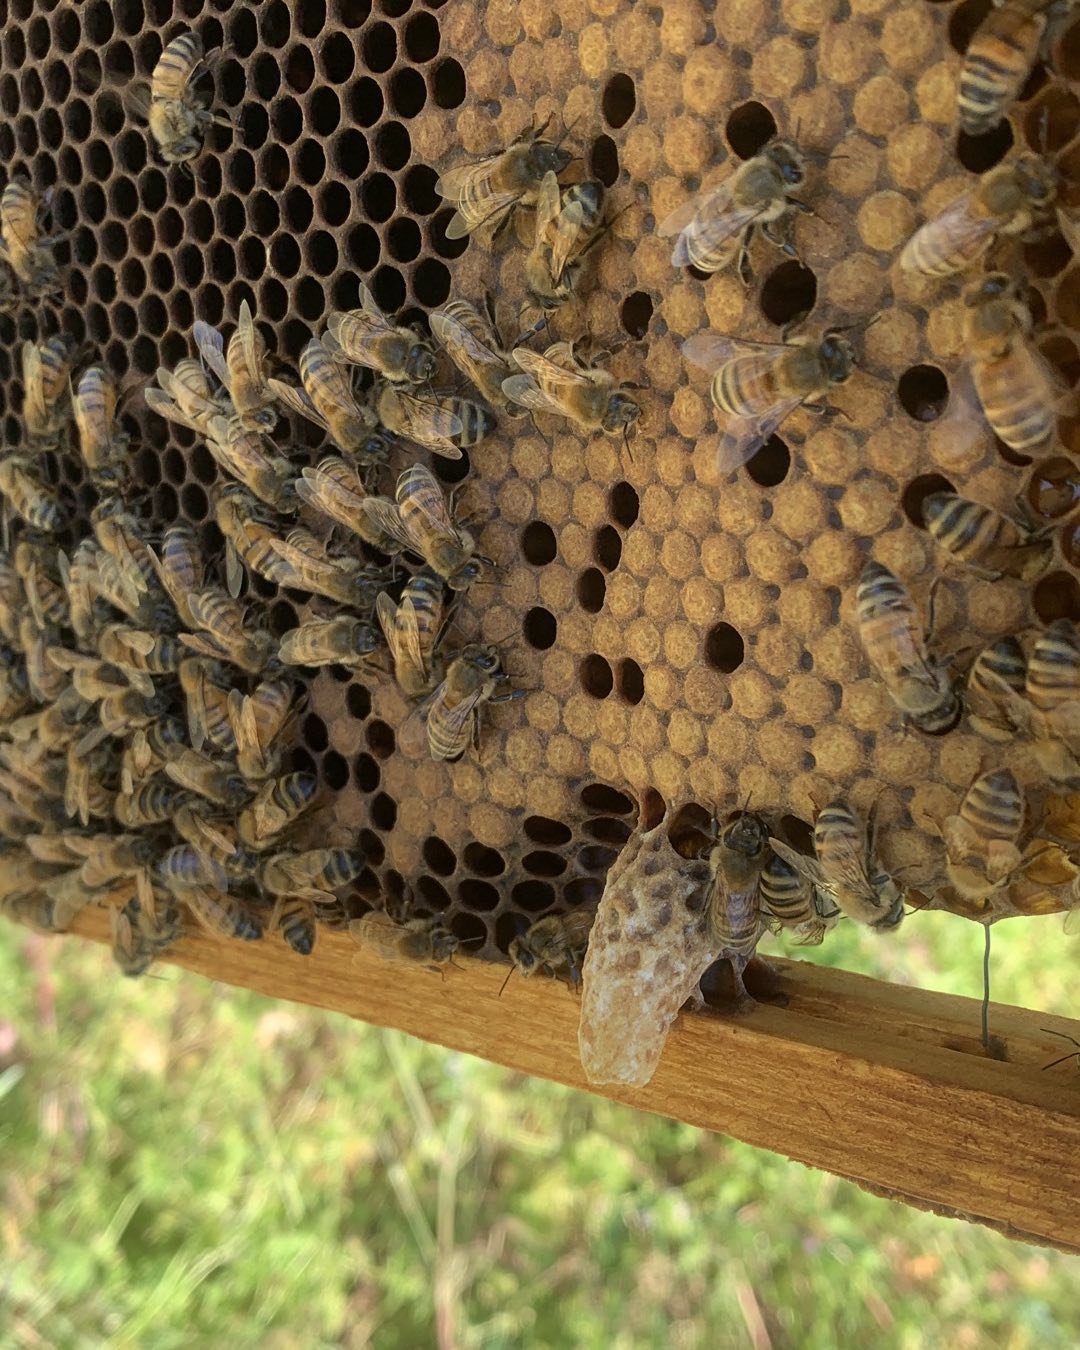 Celebrating Earth Day with our favorite pollinators - honeybees! Most of the baby bees develop in flat topped comb cells. But every once in a while, there&rsquo;s a special one who doesn&rsquo;t fit. 

Who is she? The Queen! Because of her long body,